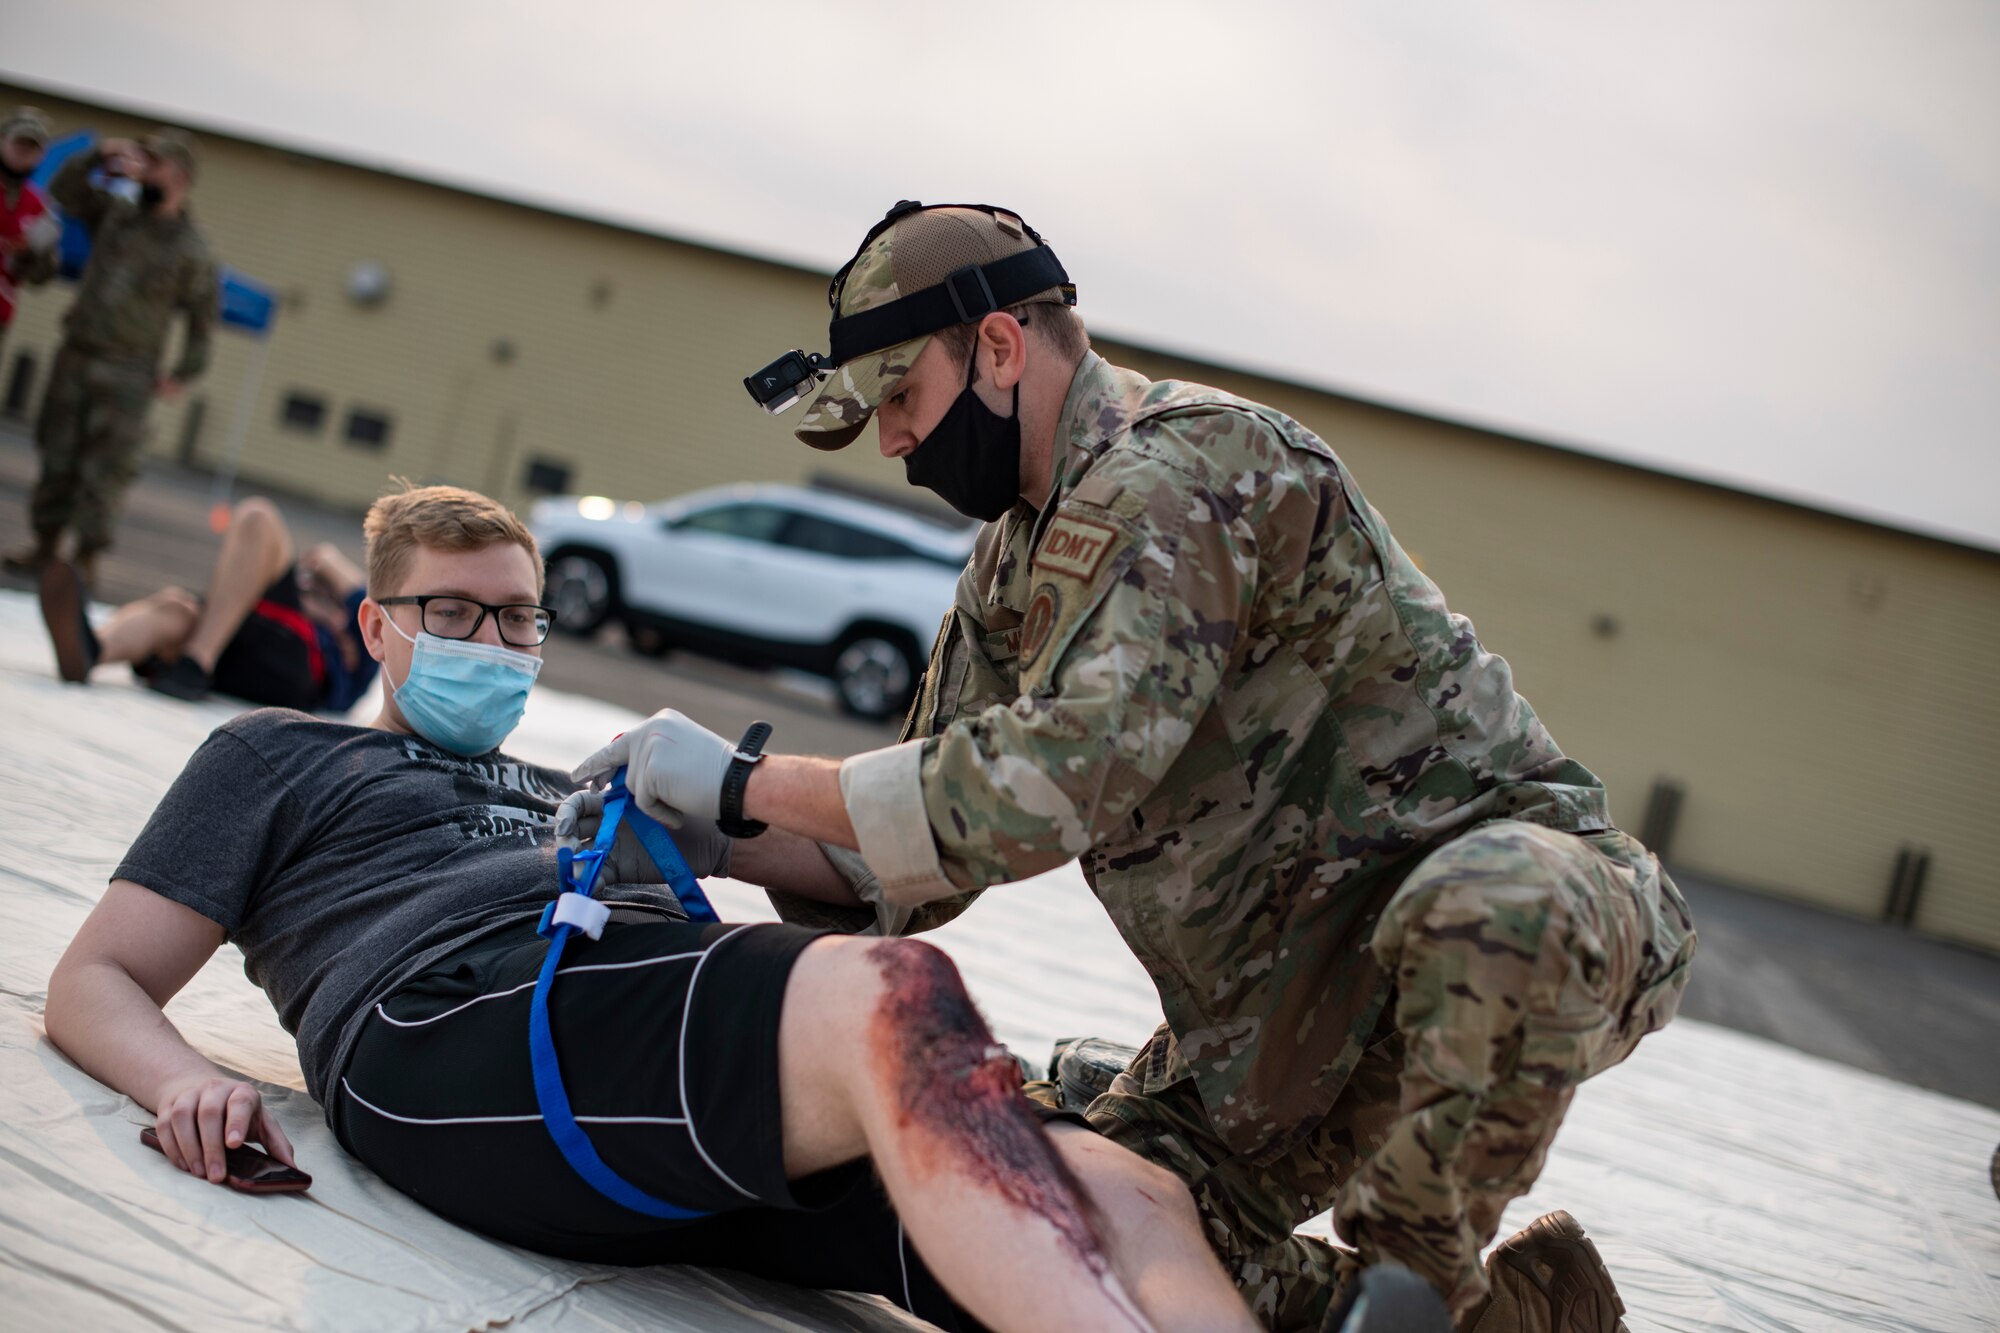 Staff Sgt. Casey Mulcahy, 9th Operational Medical Readiness Squadron operational medicine independent duty medical technician, tourniquets  a patient’s simulated leg wound during exercise Ready Eagle Aug. 6, 2021, at Beale Air Force Base, California.